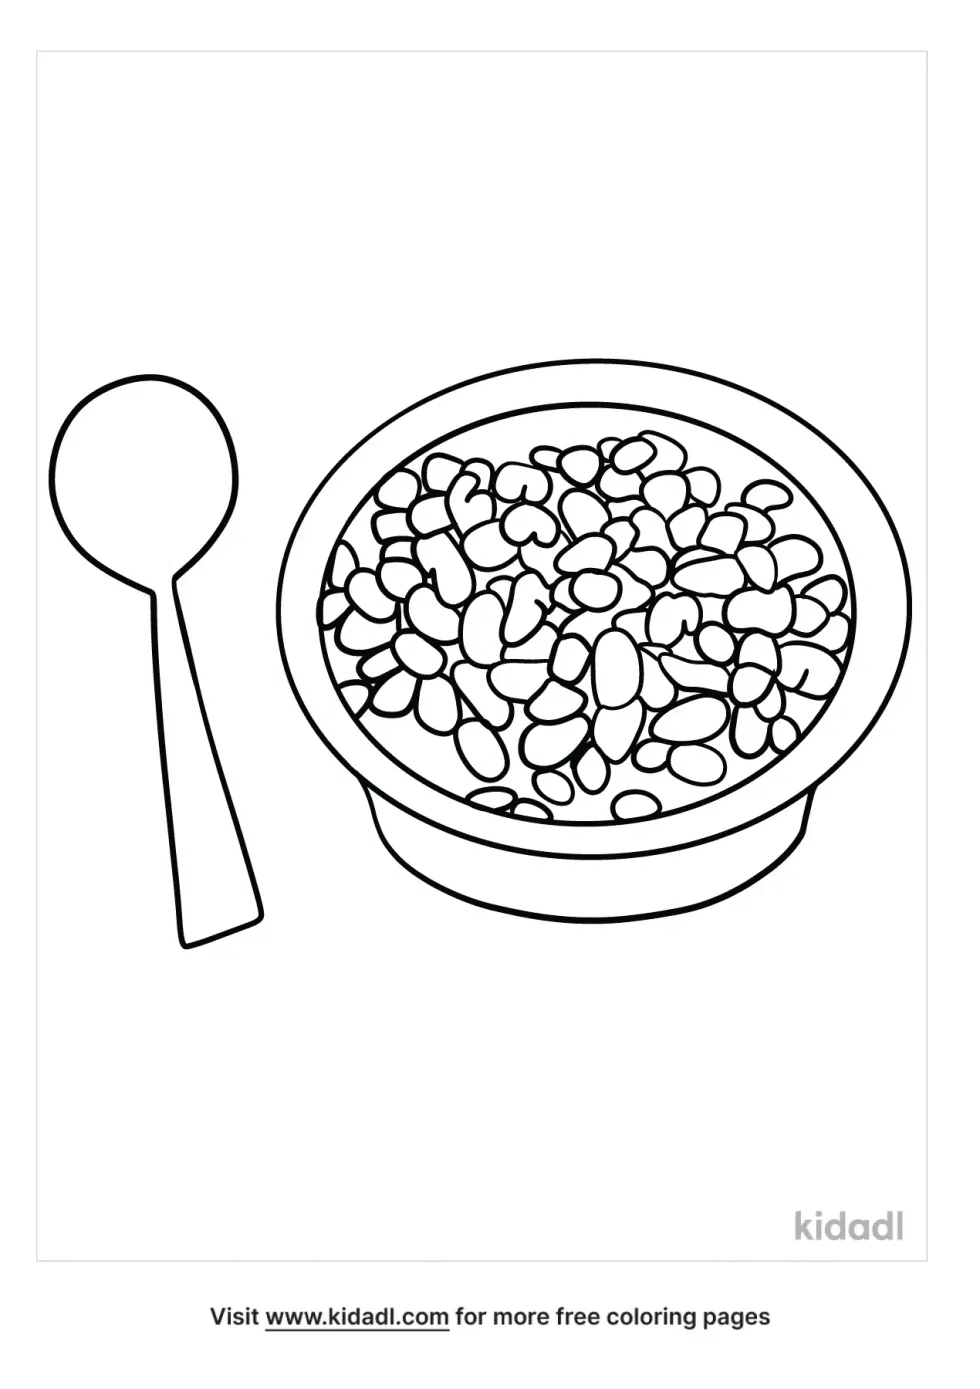 Baked Beans Coloring Page